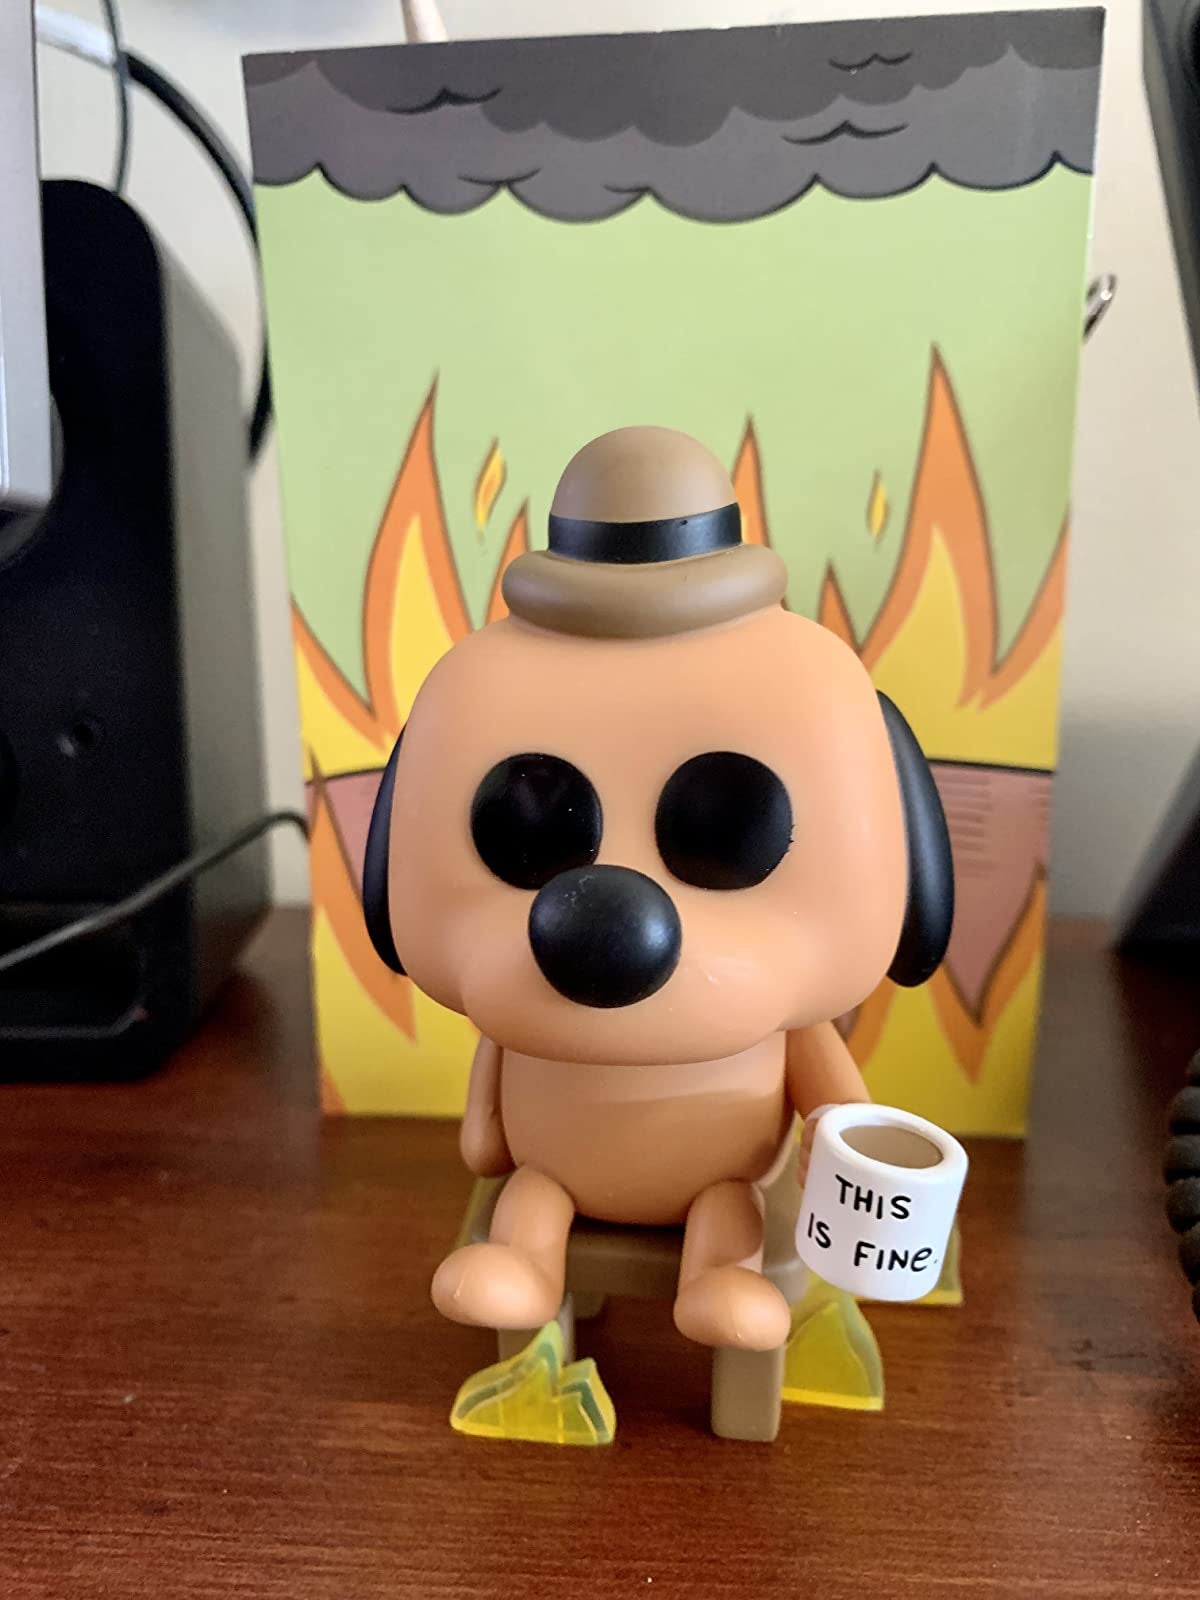 figure of dog in chair with this is fine much with little plastic flames at the base, on a reviewer's desk with flame and smoke background